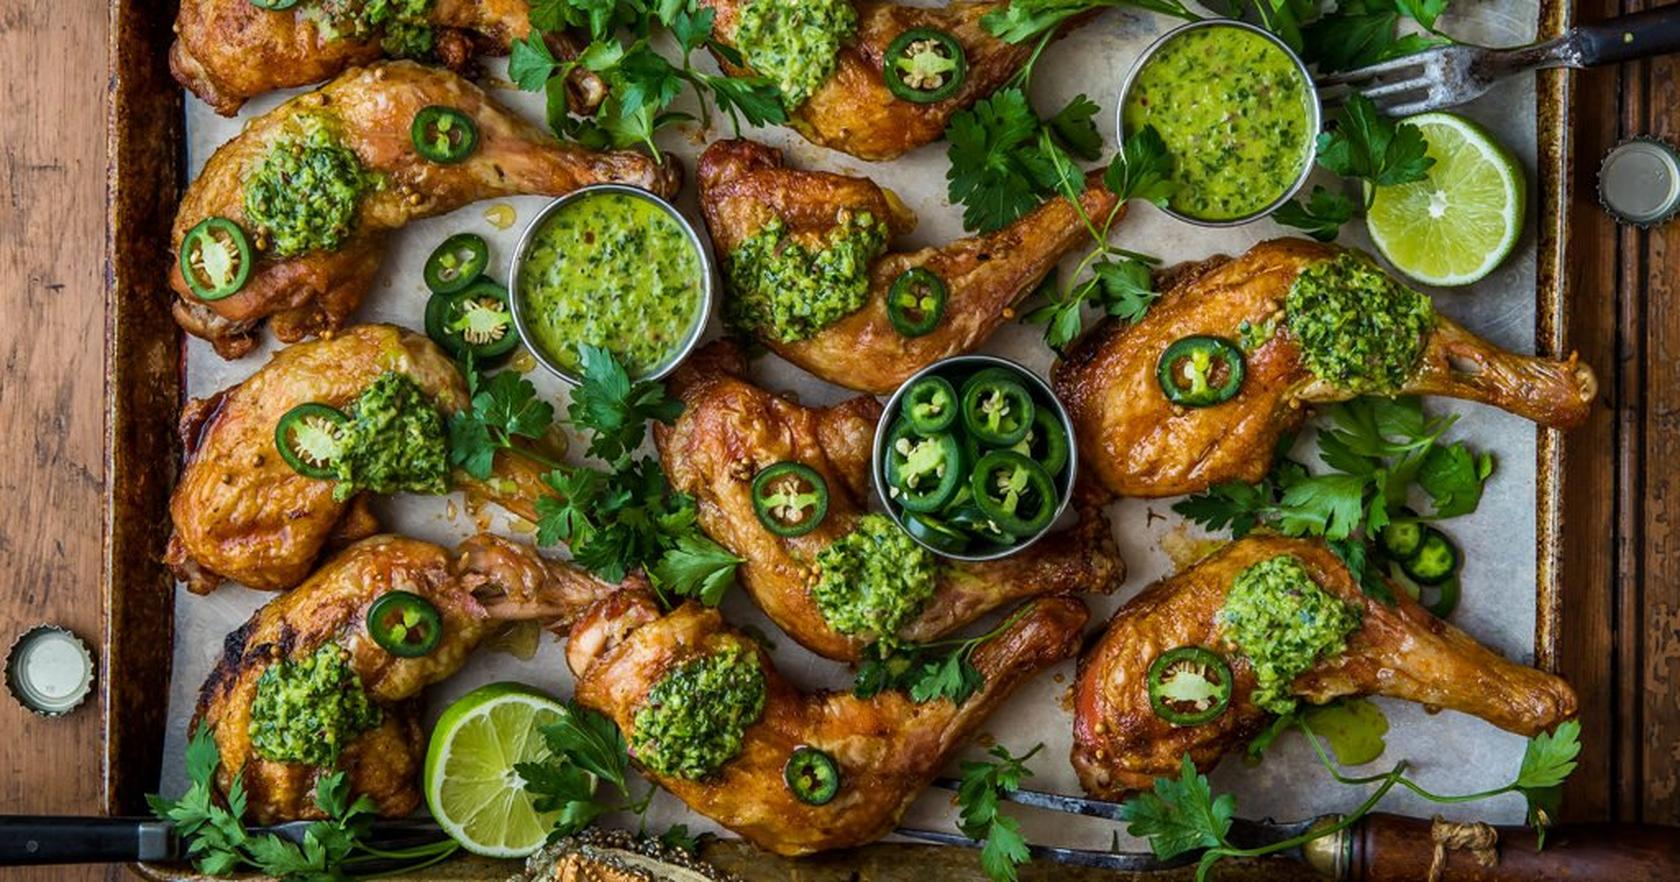 Smoked Chicken with Chimichurri by Dennis the Prescott